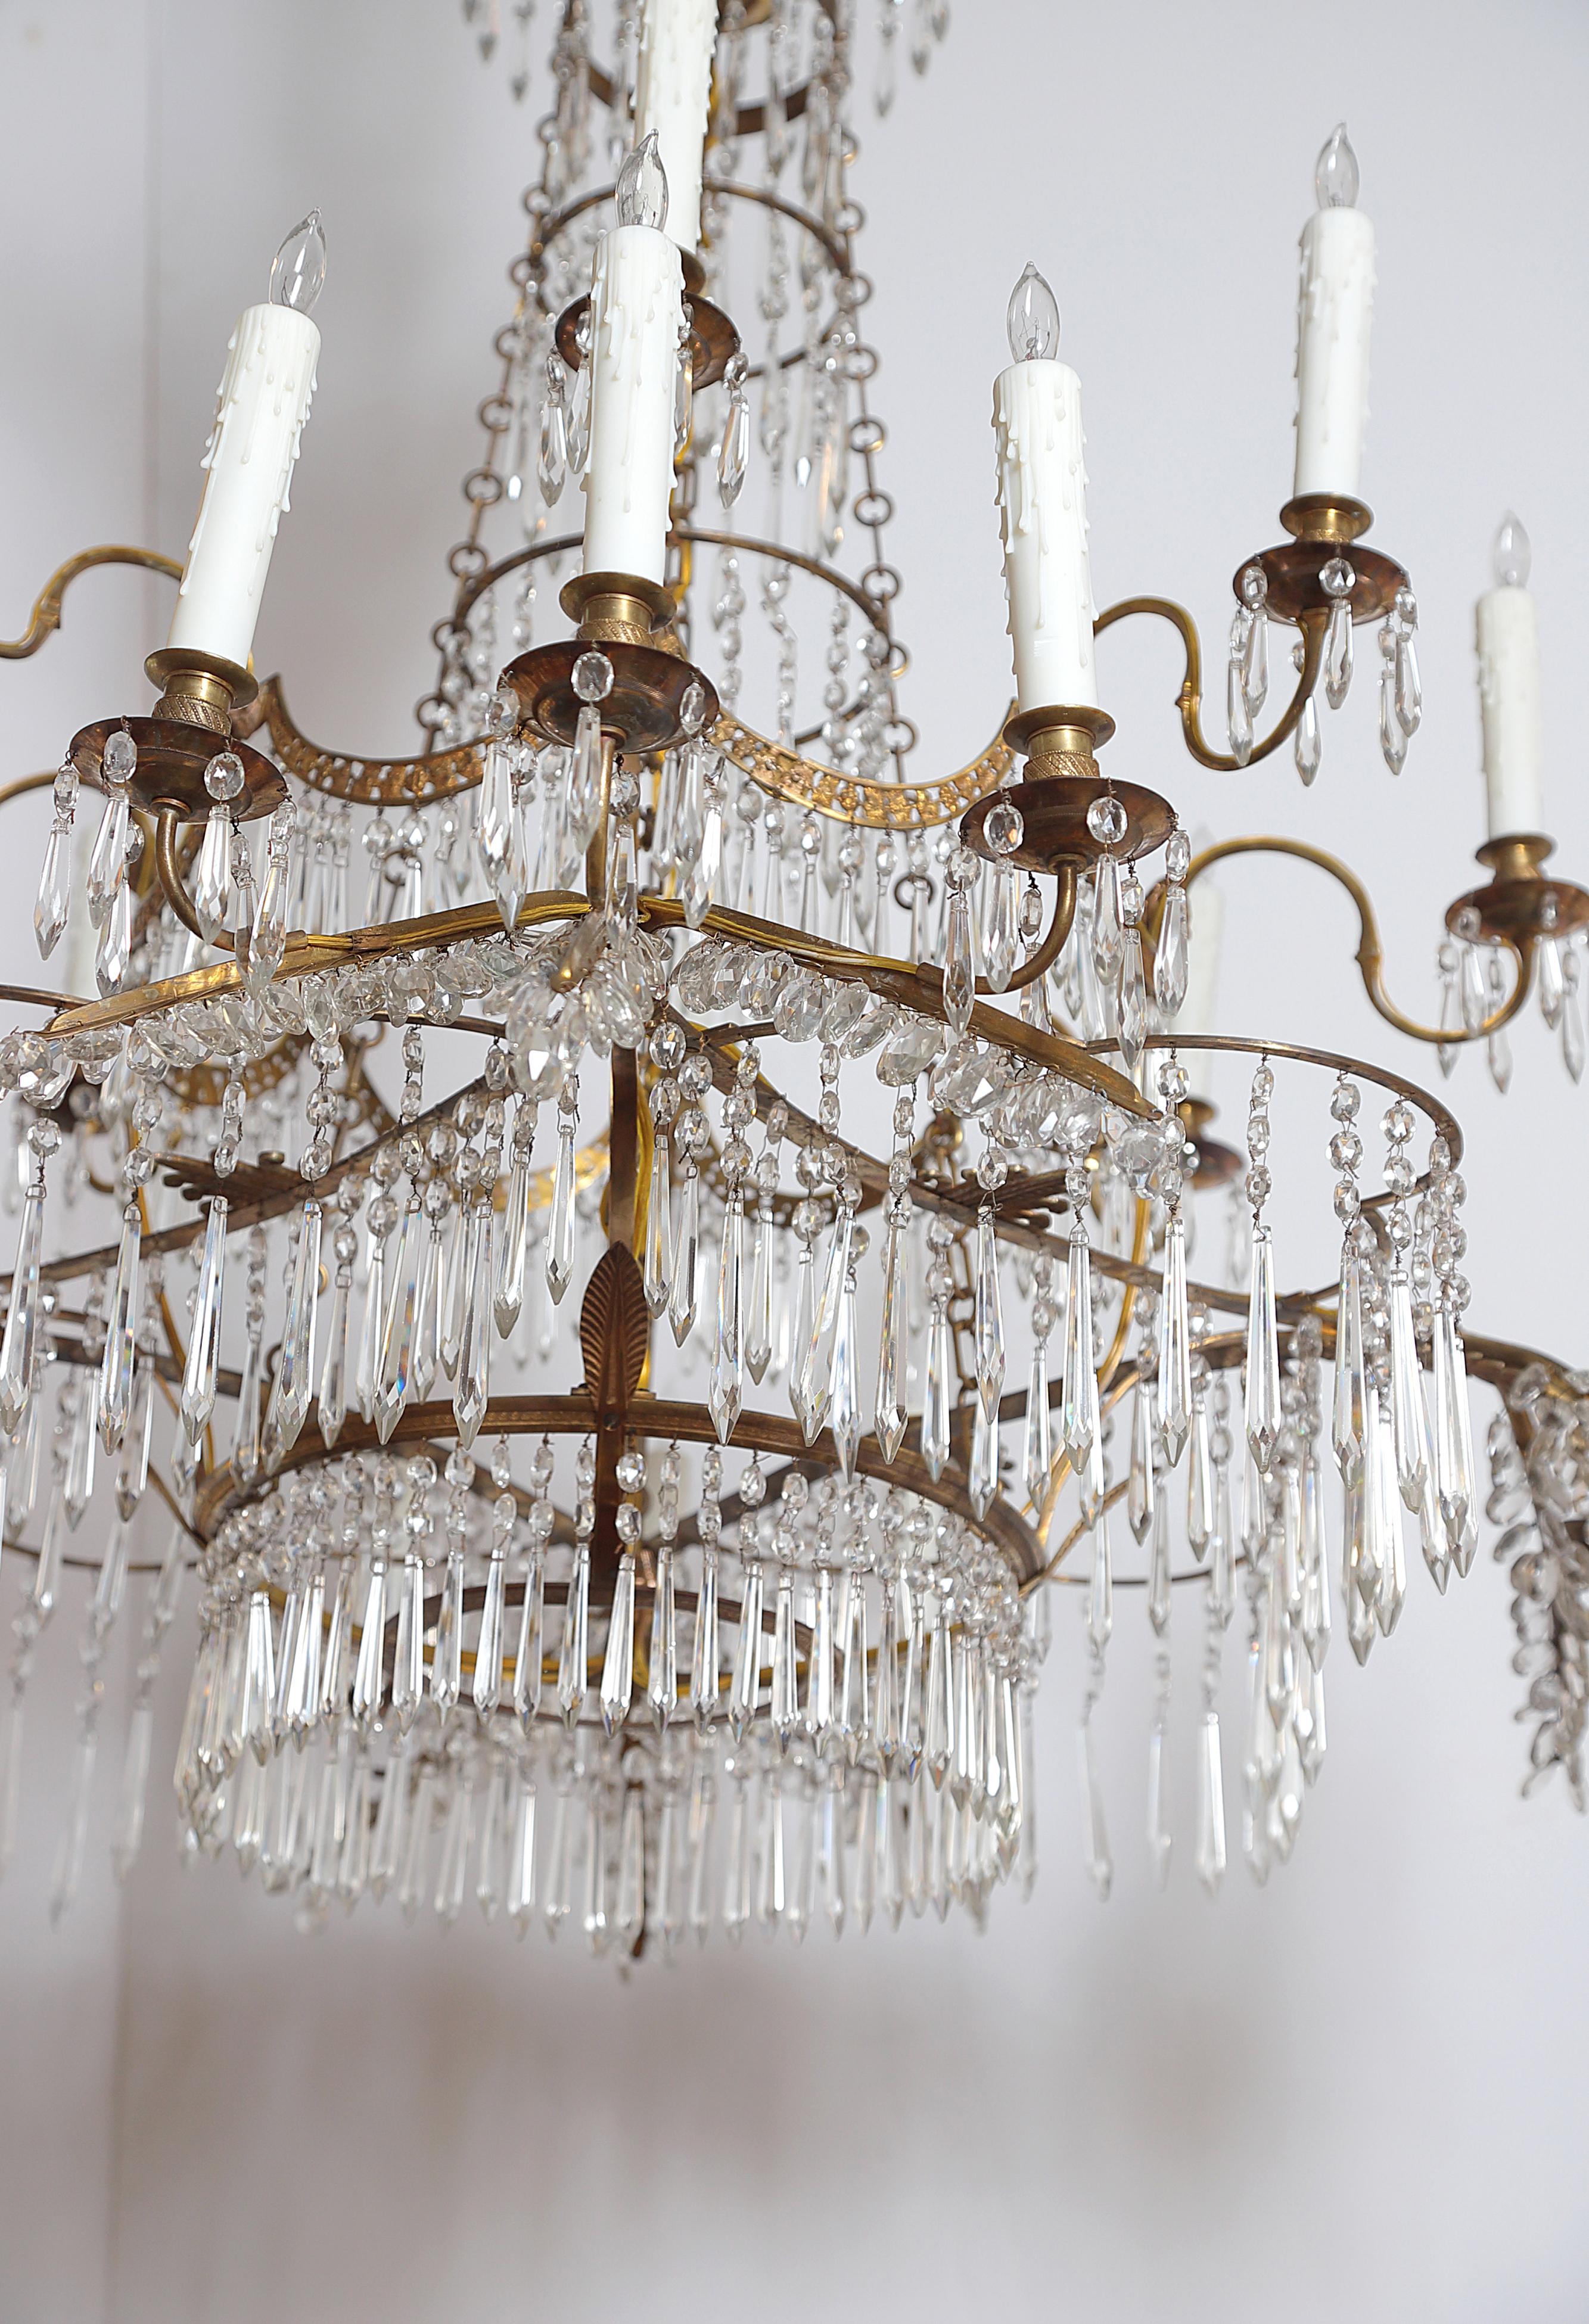 18th Century 20-Light Neoclassic Chandelier, German Probably Werner & Mieth For Sale 6